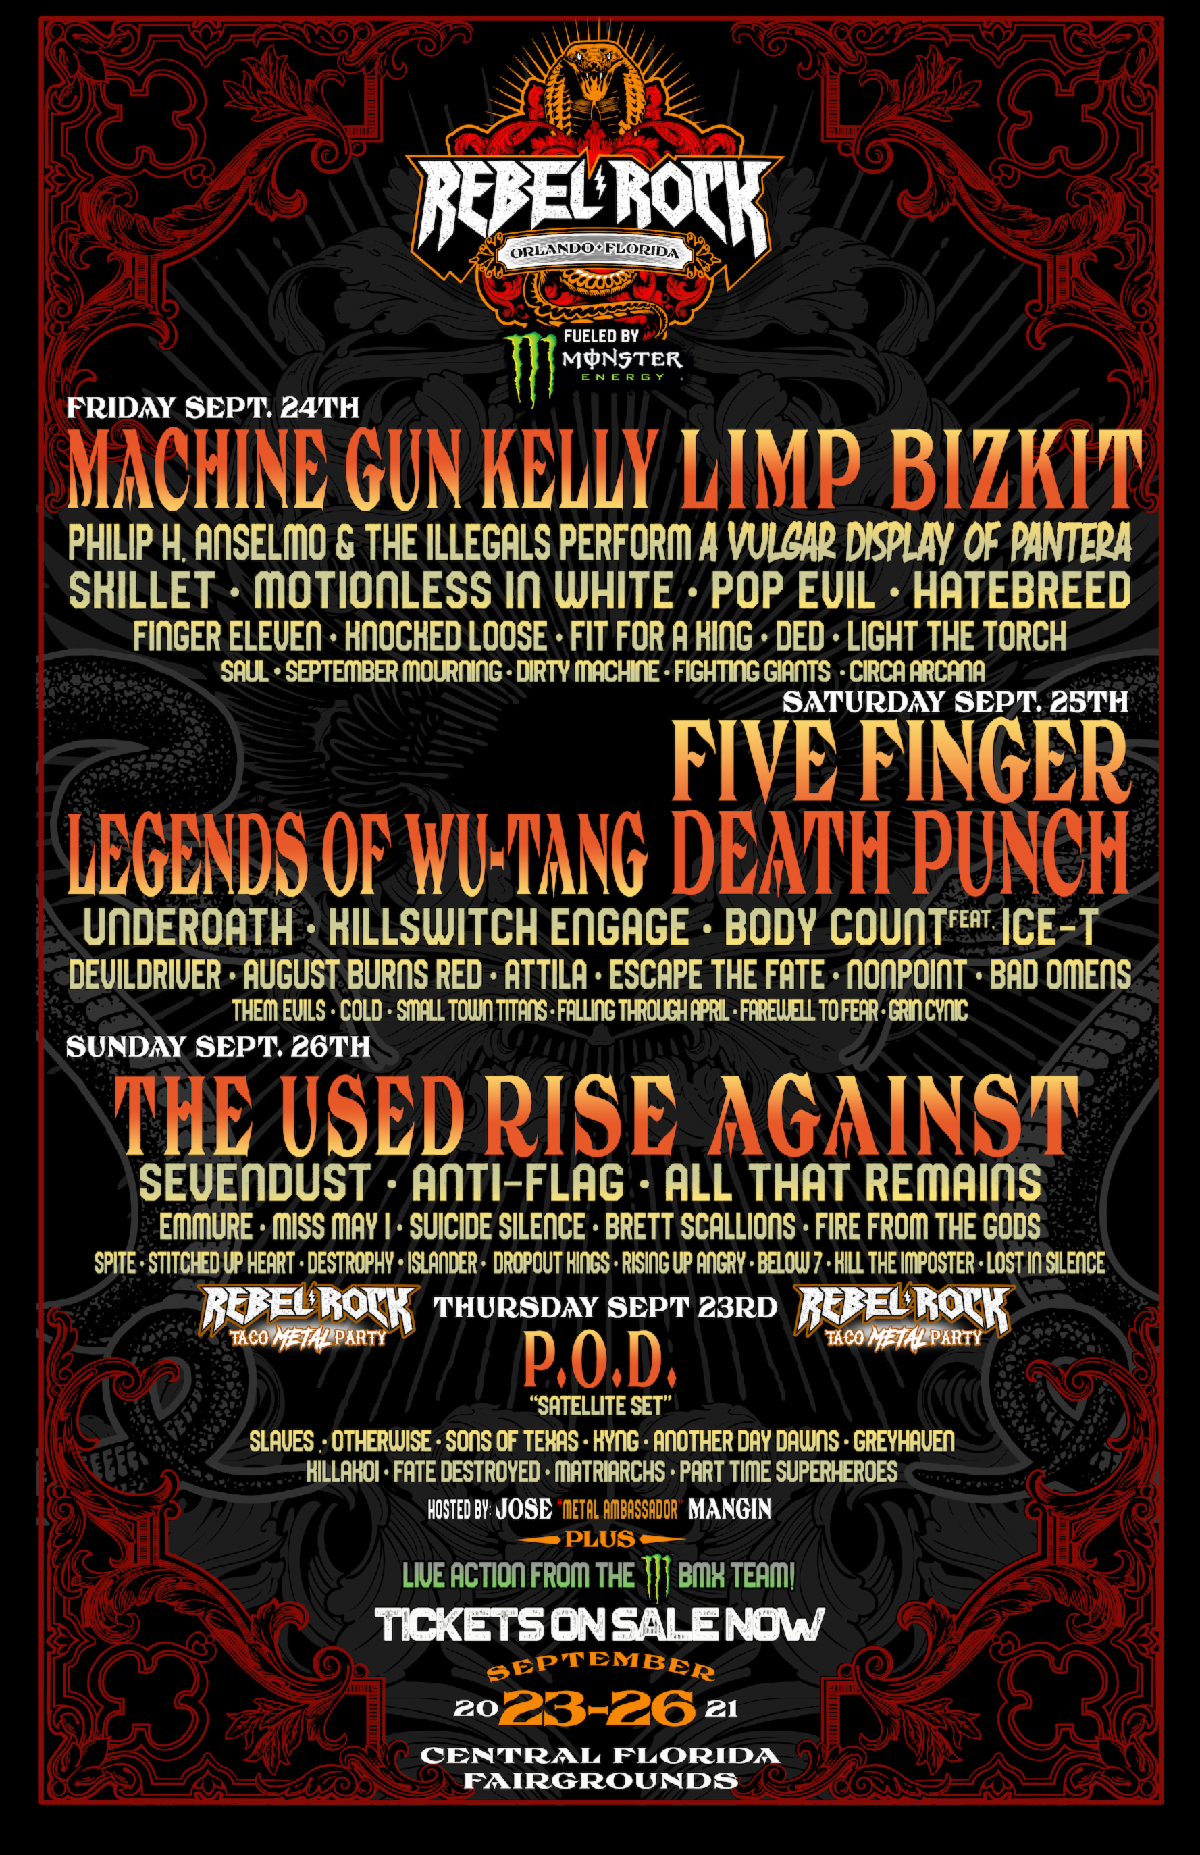 Rebel Rock adds Machine Gun Kelly to inaugural festival lineup - Sep 23-26 Central FL Fairgrounds